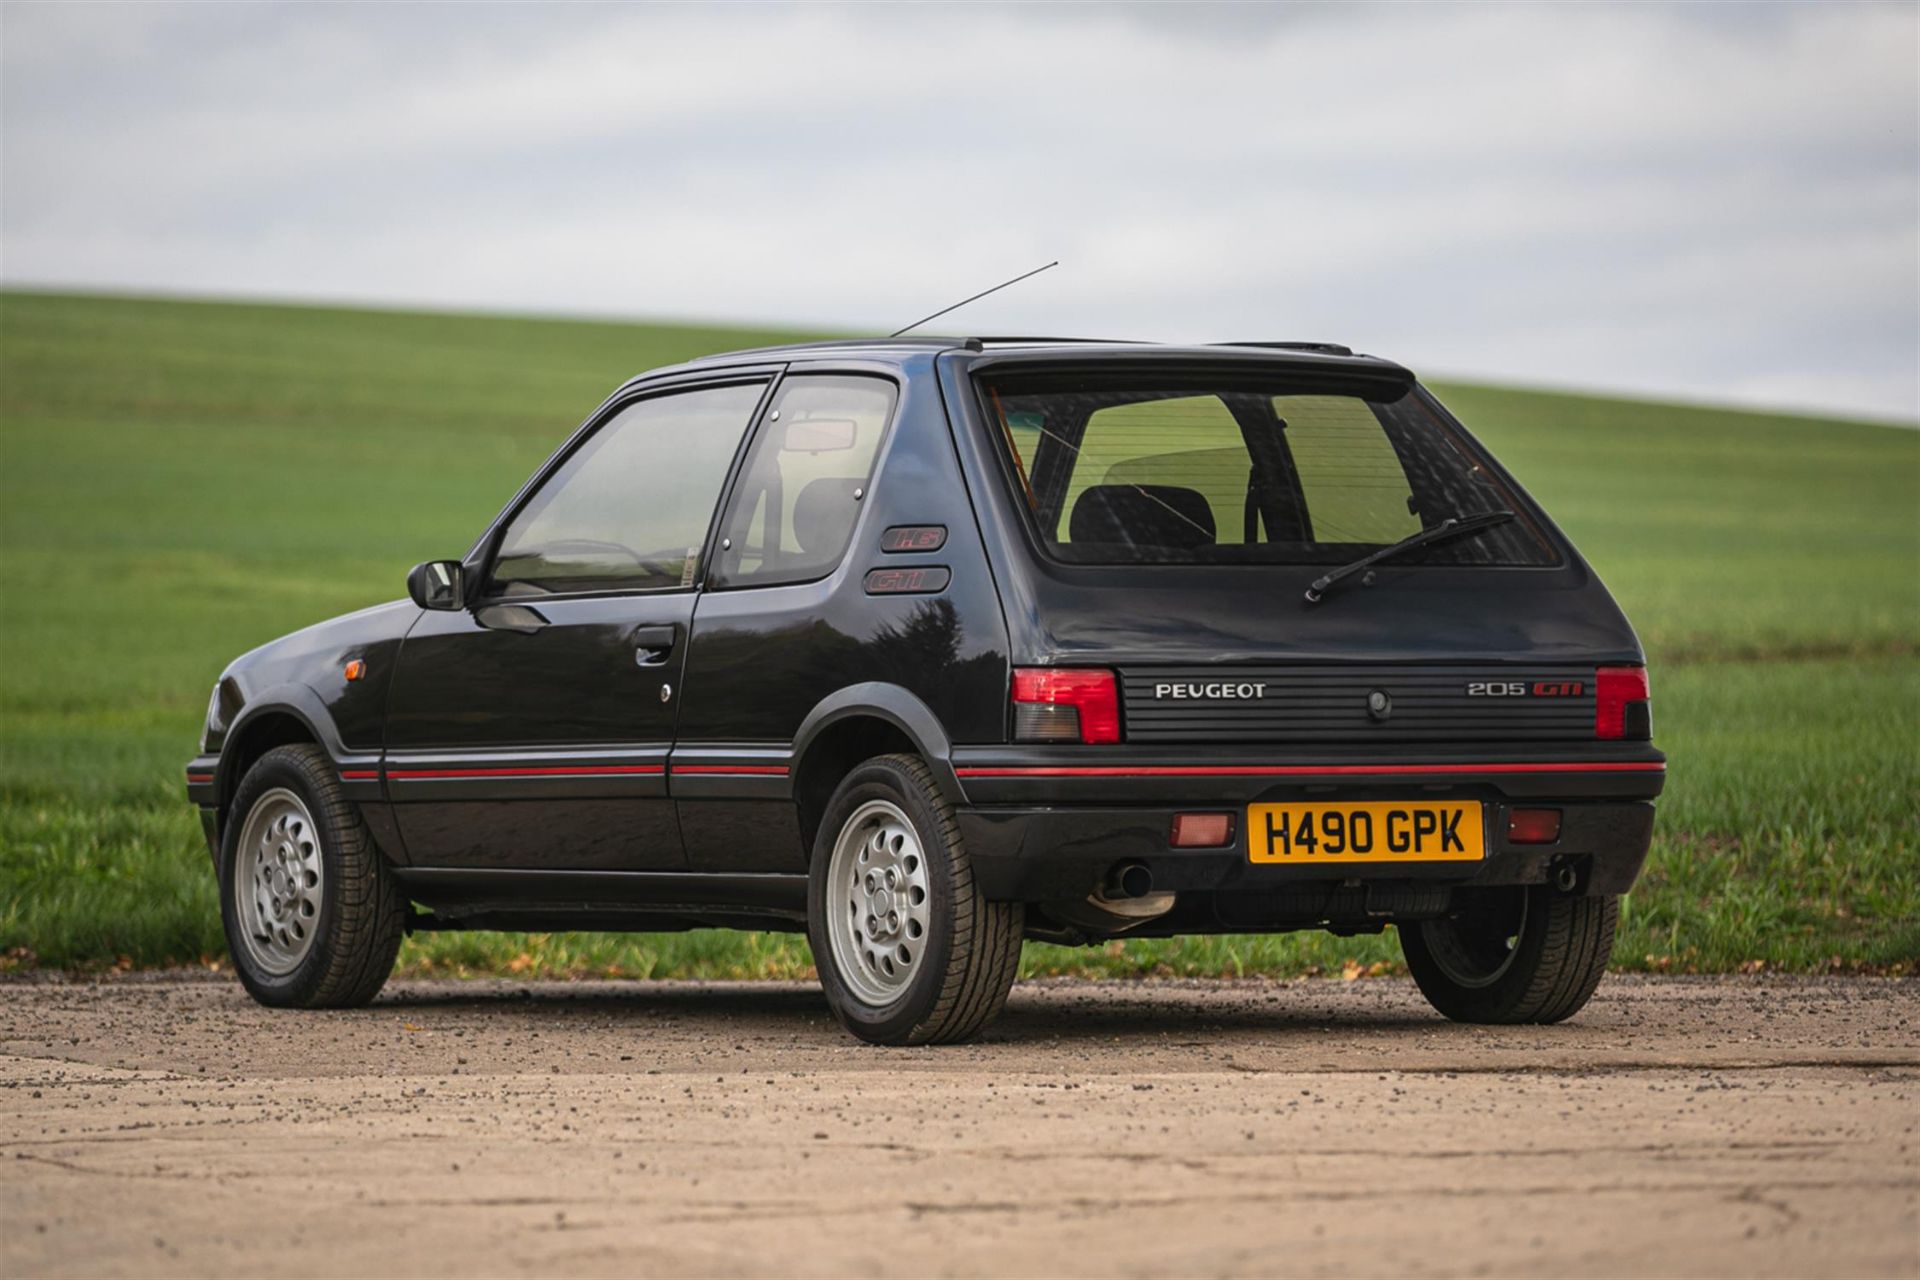 1990 Peugeot 205 GTi 1.6 (Phase 2) - Image 4 of 10